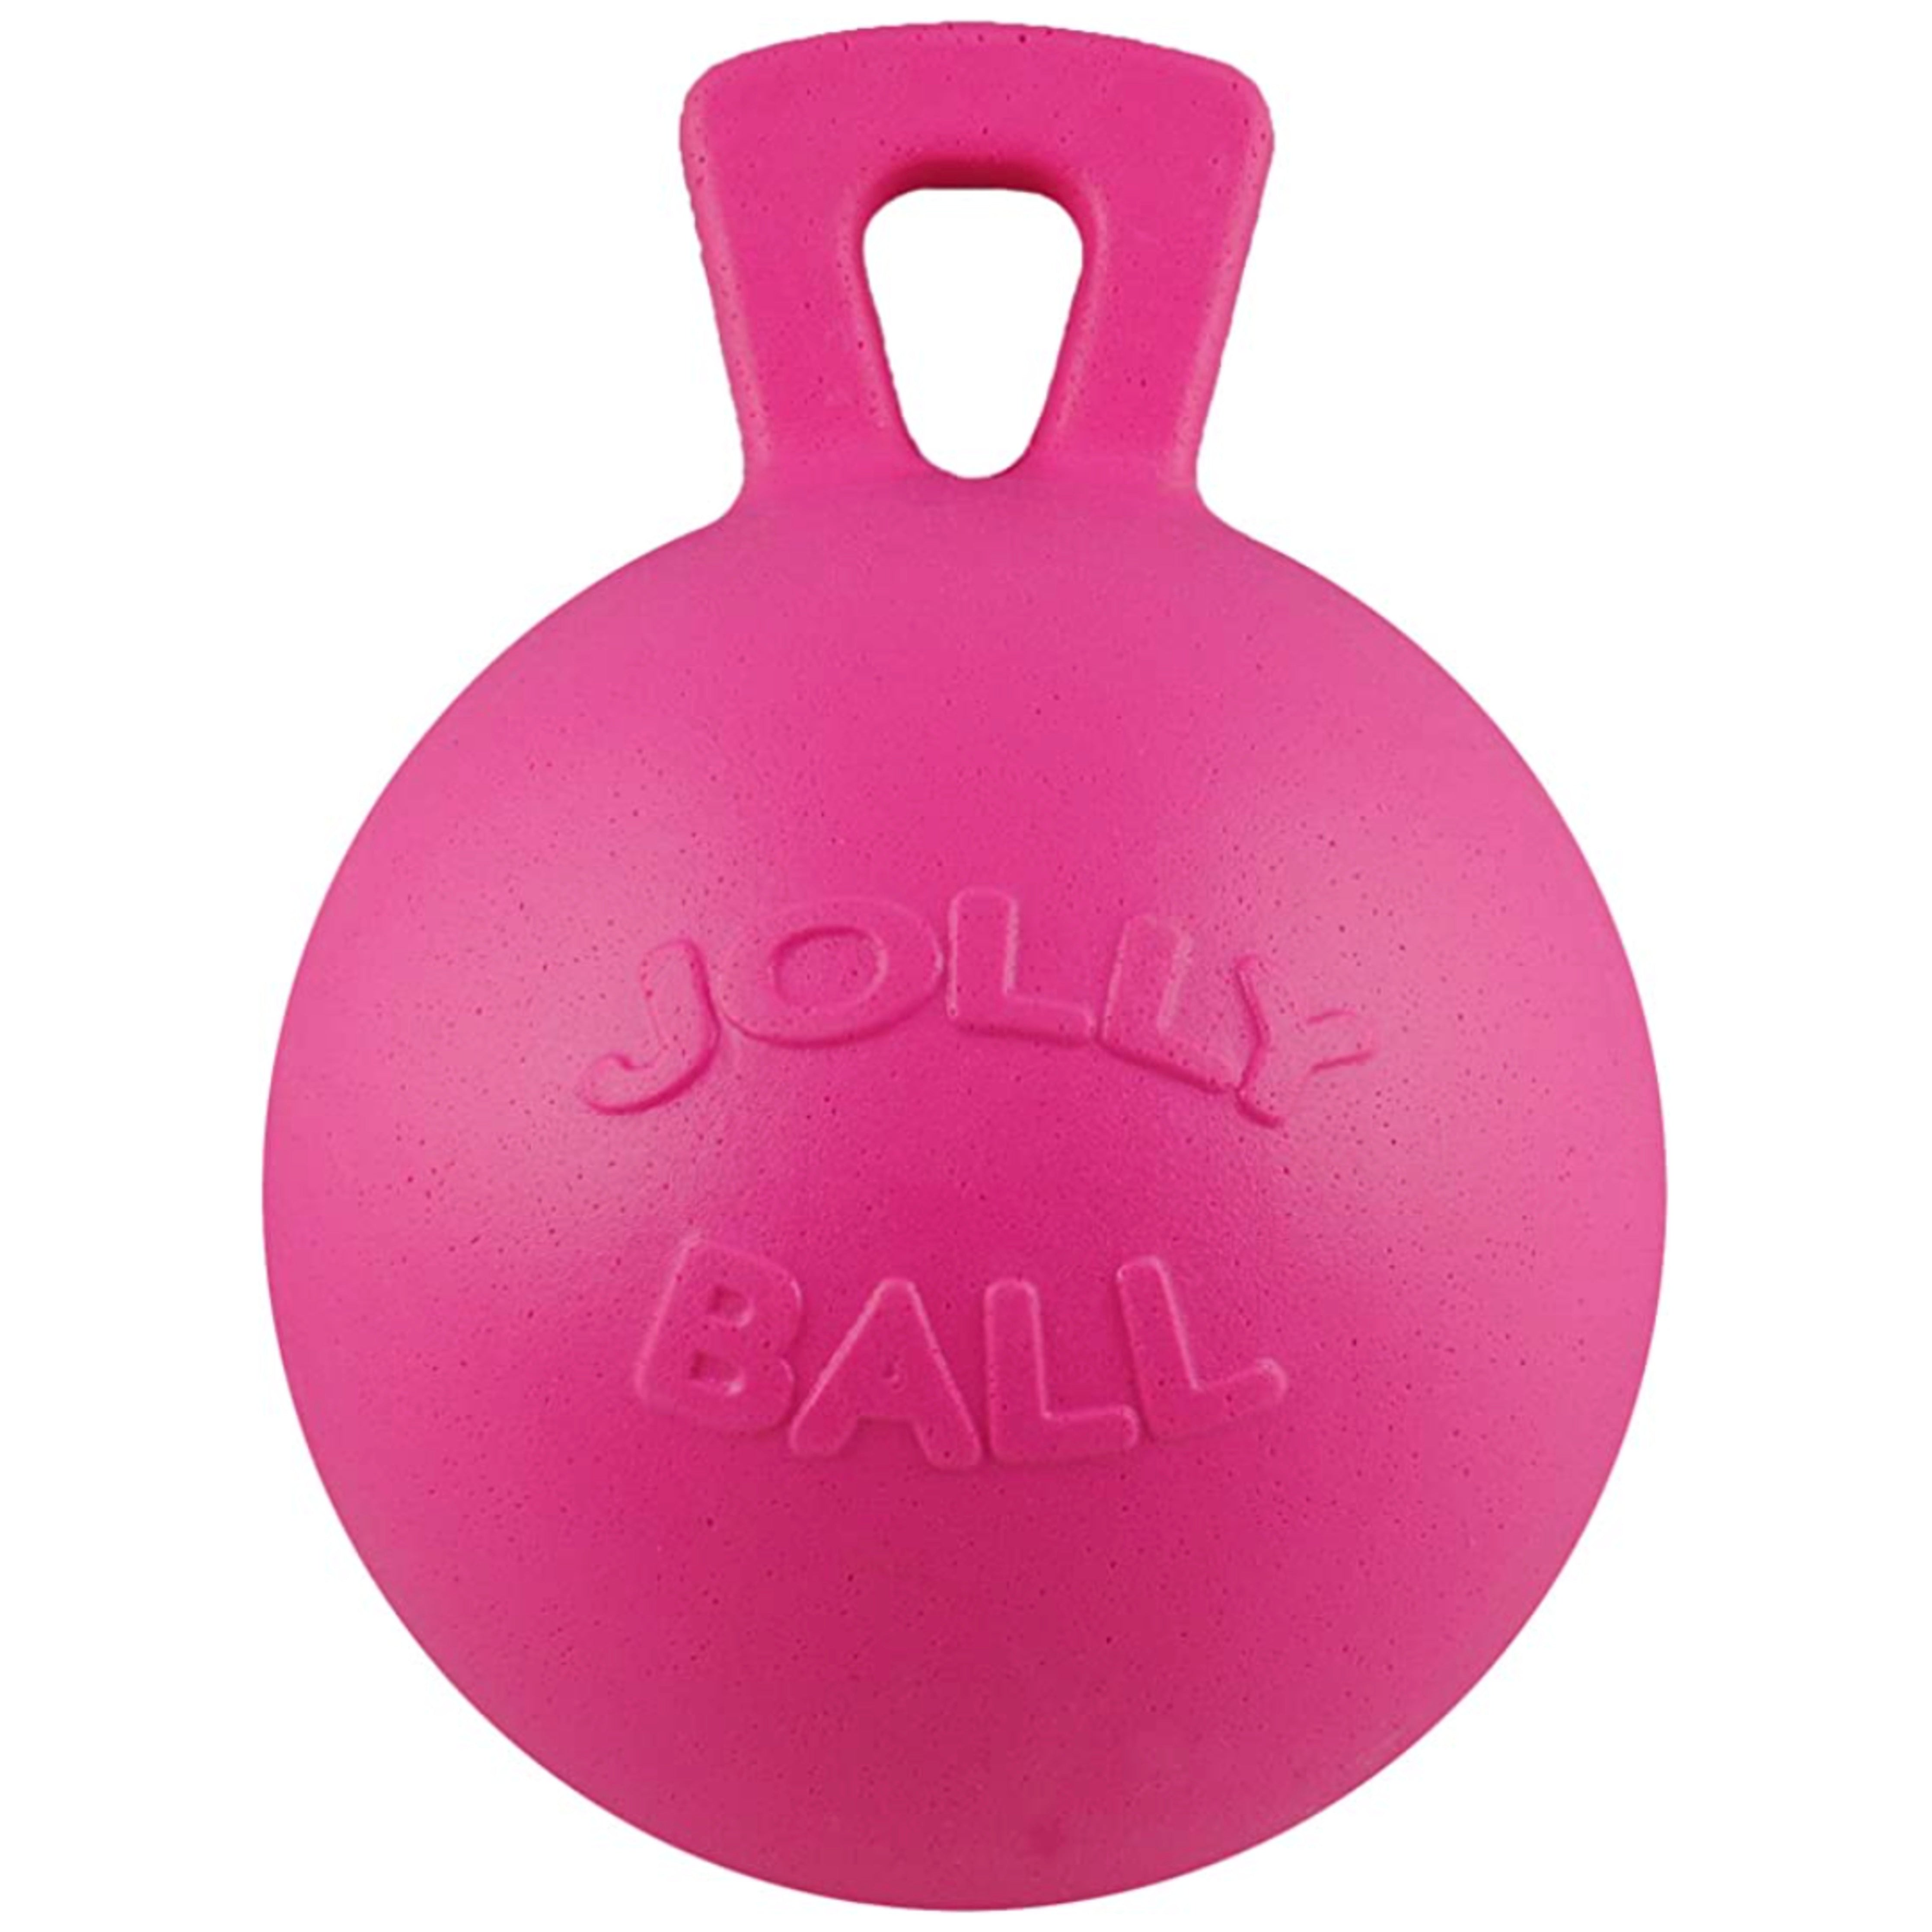 Jolly Ball Scented 10"